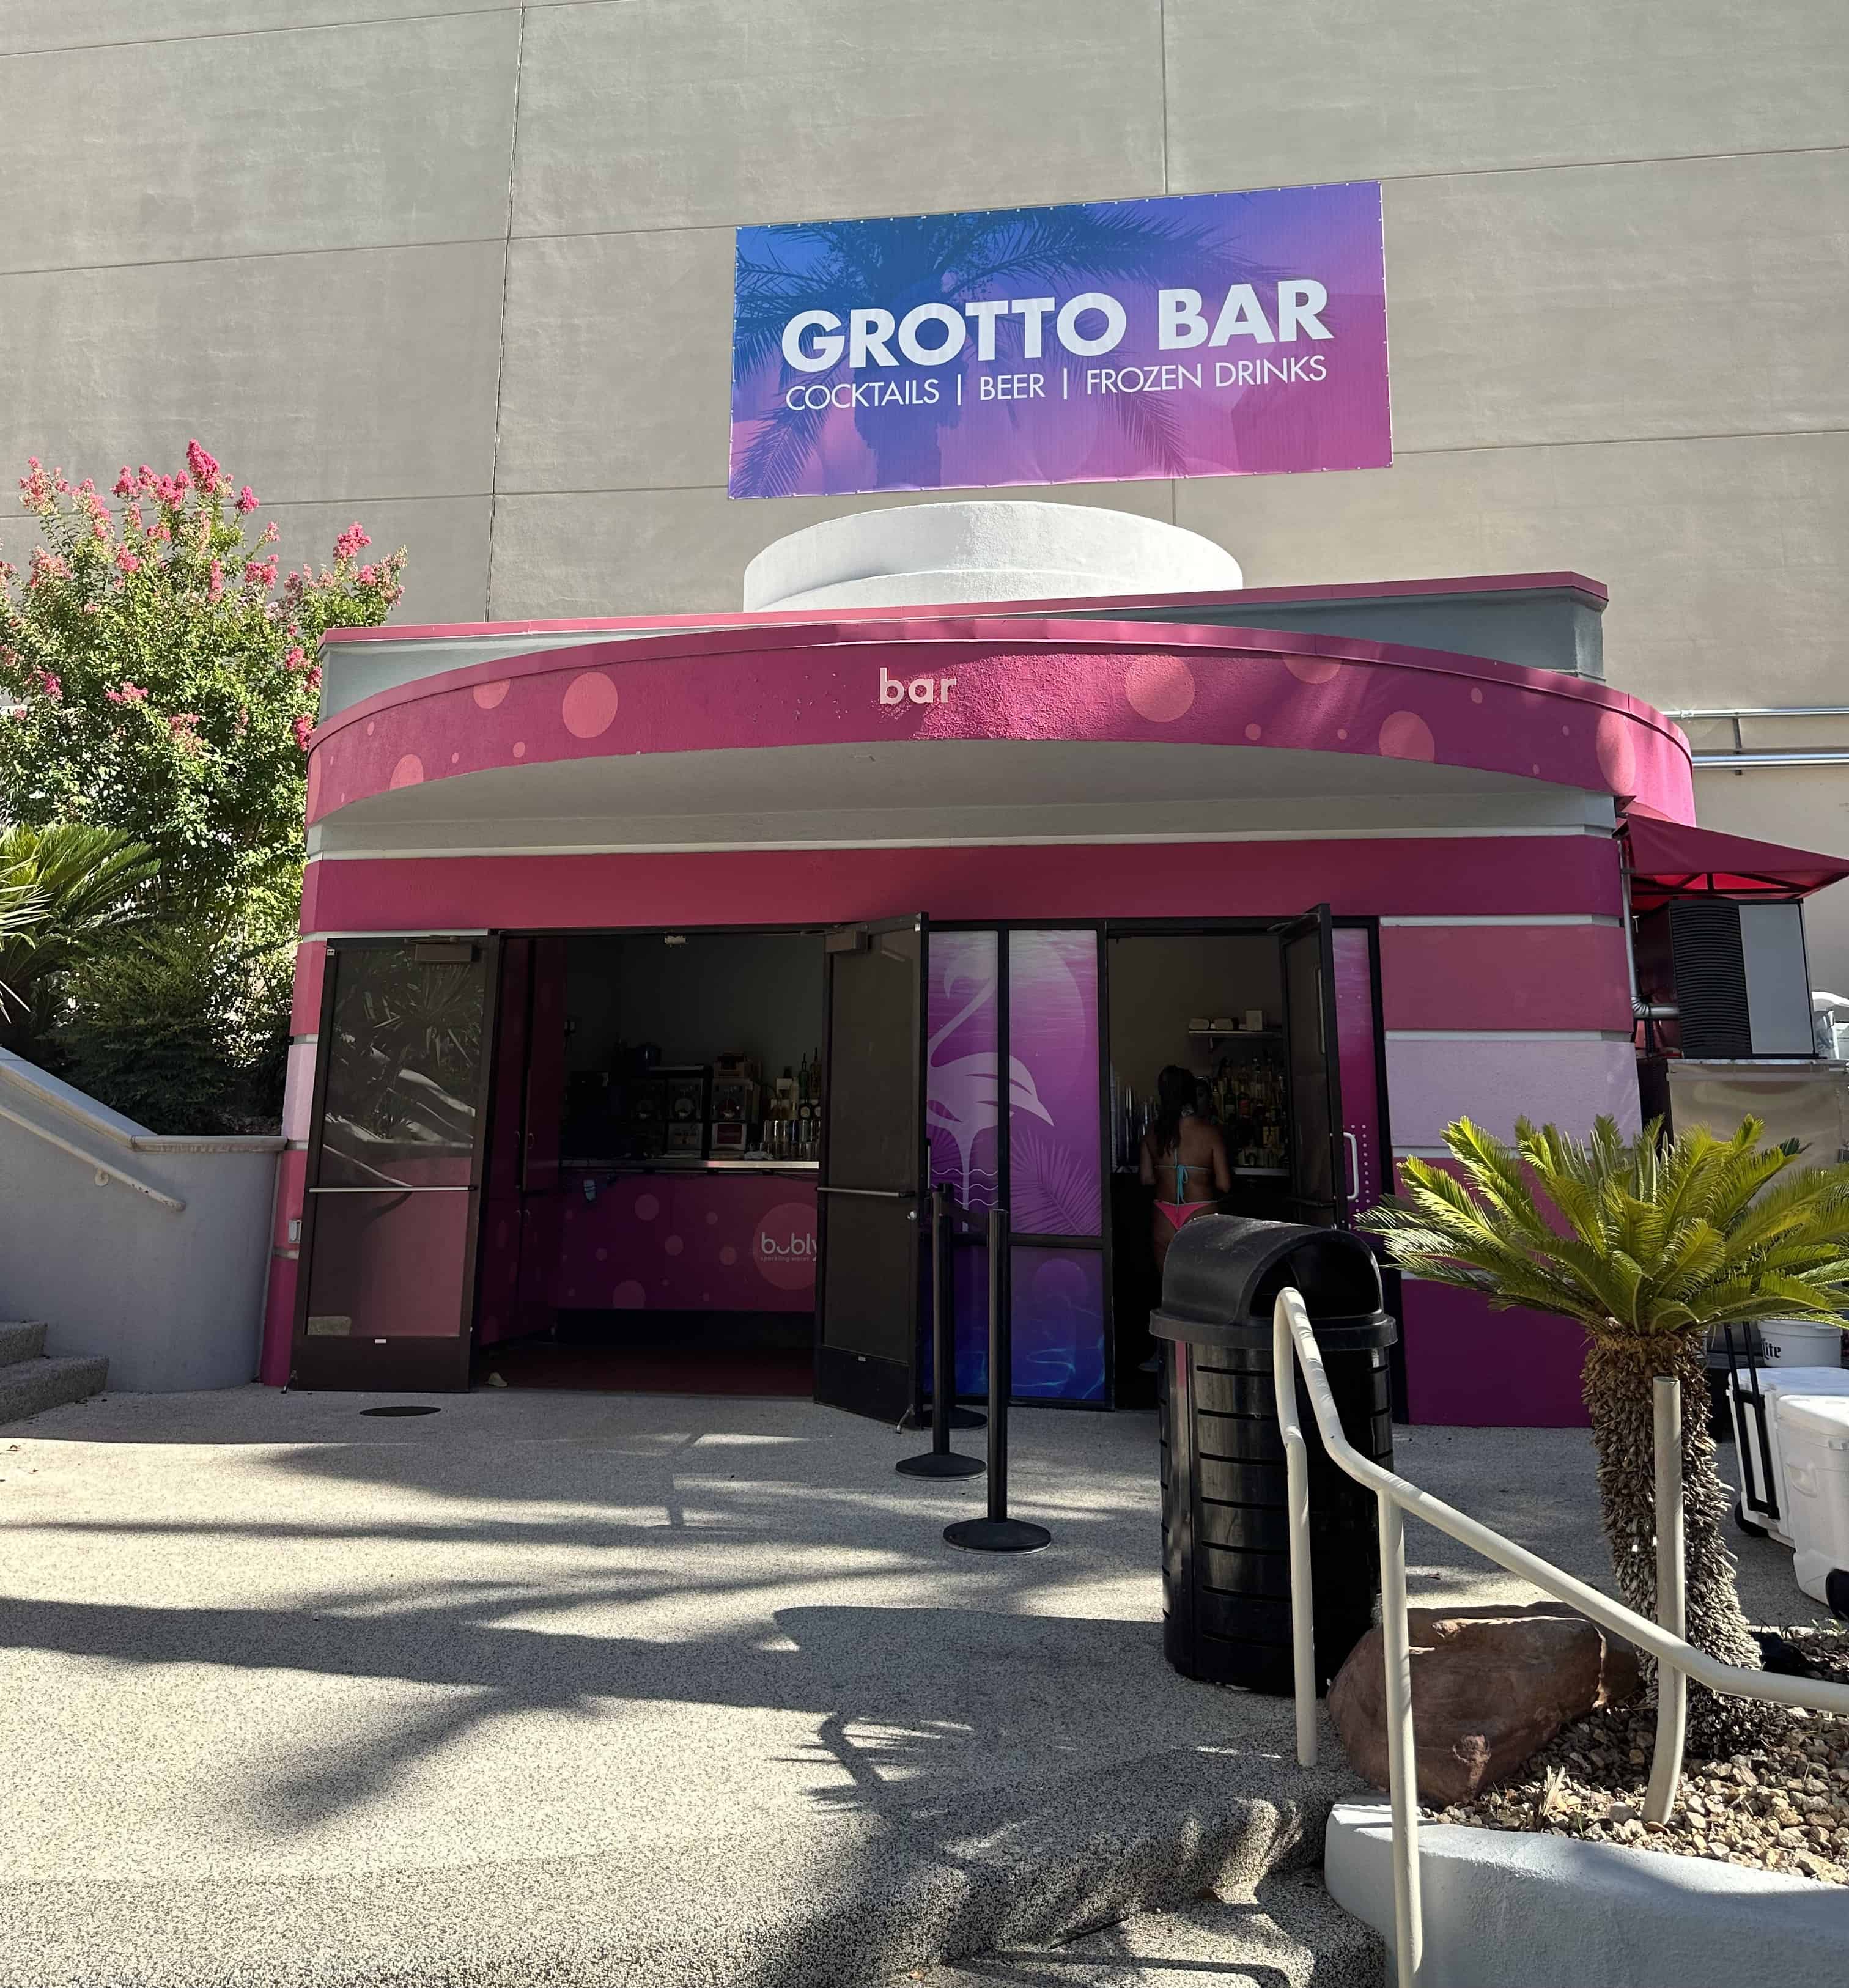 Outside view of the Grotto Bar. It has a large purple and red sign above a large red awning.